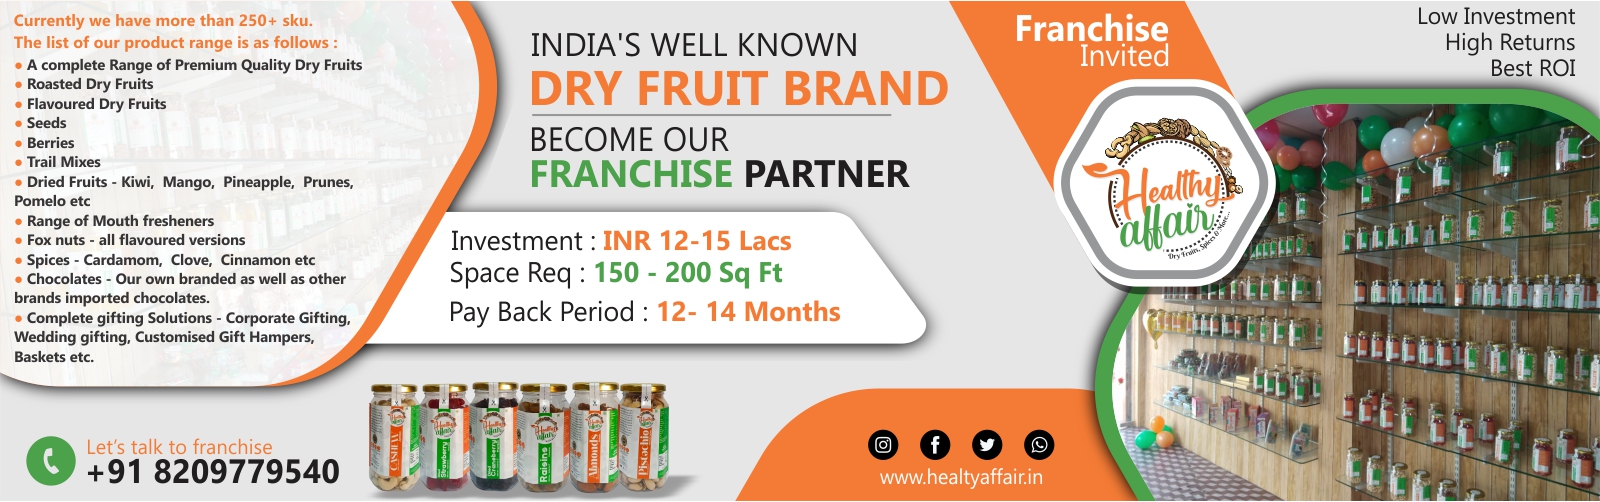 admin/uploads/brand_registration/Healthy Affair ( India's Well Known Dry Fruit Brand )